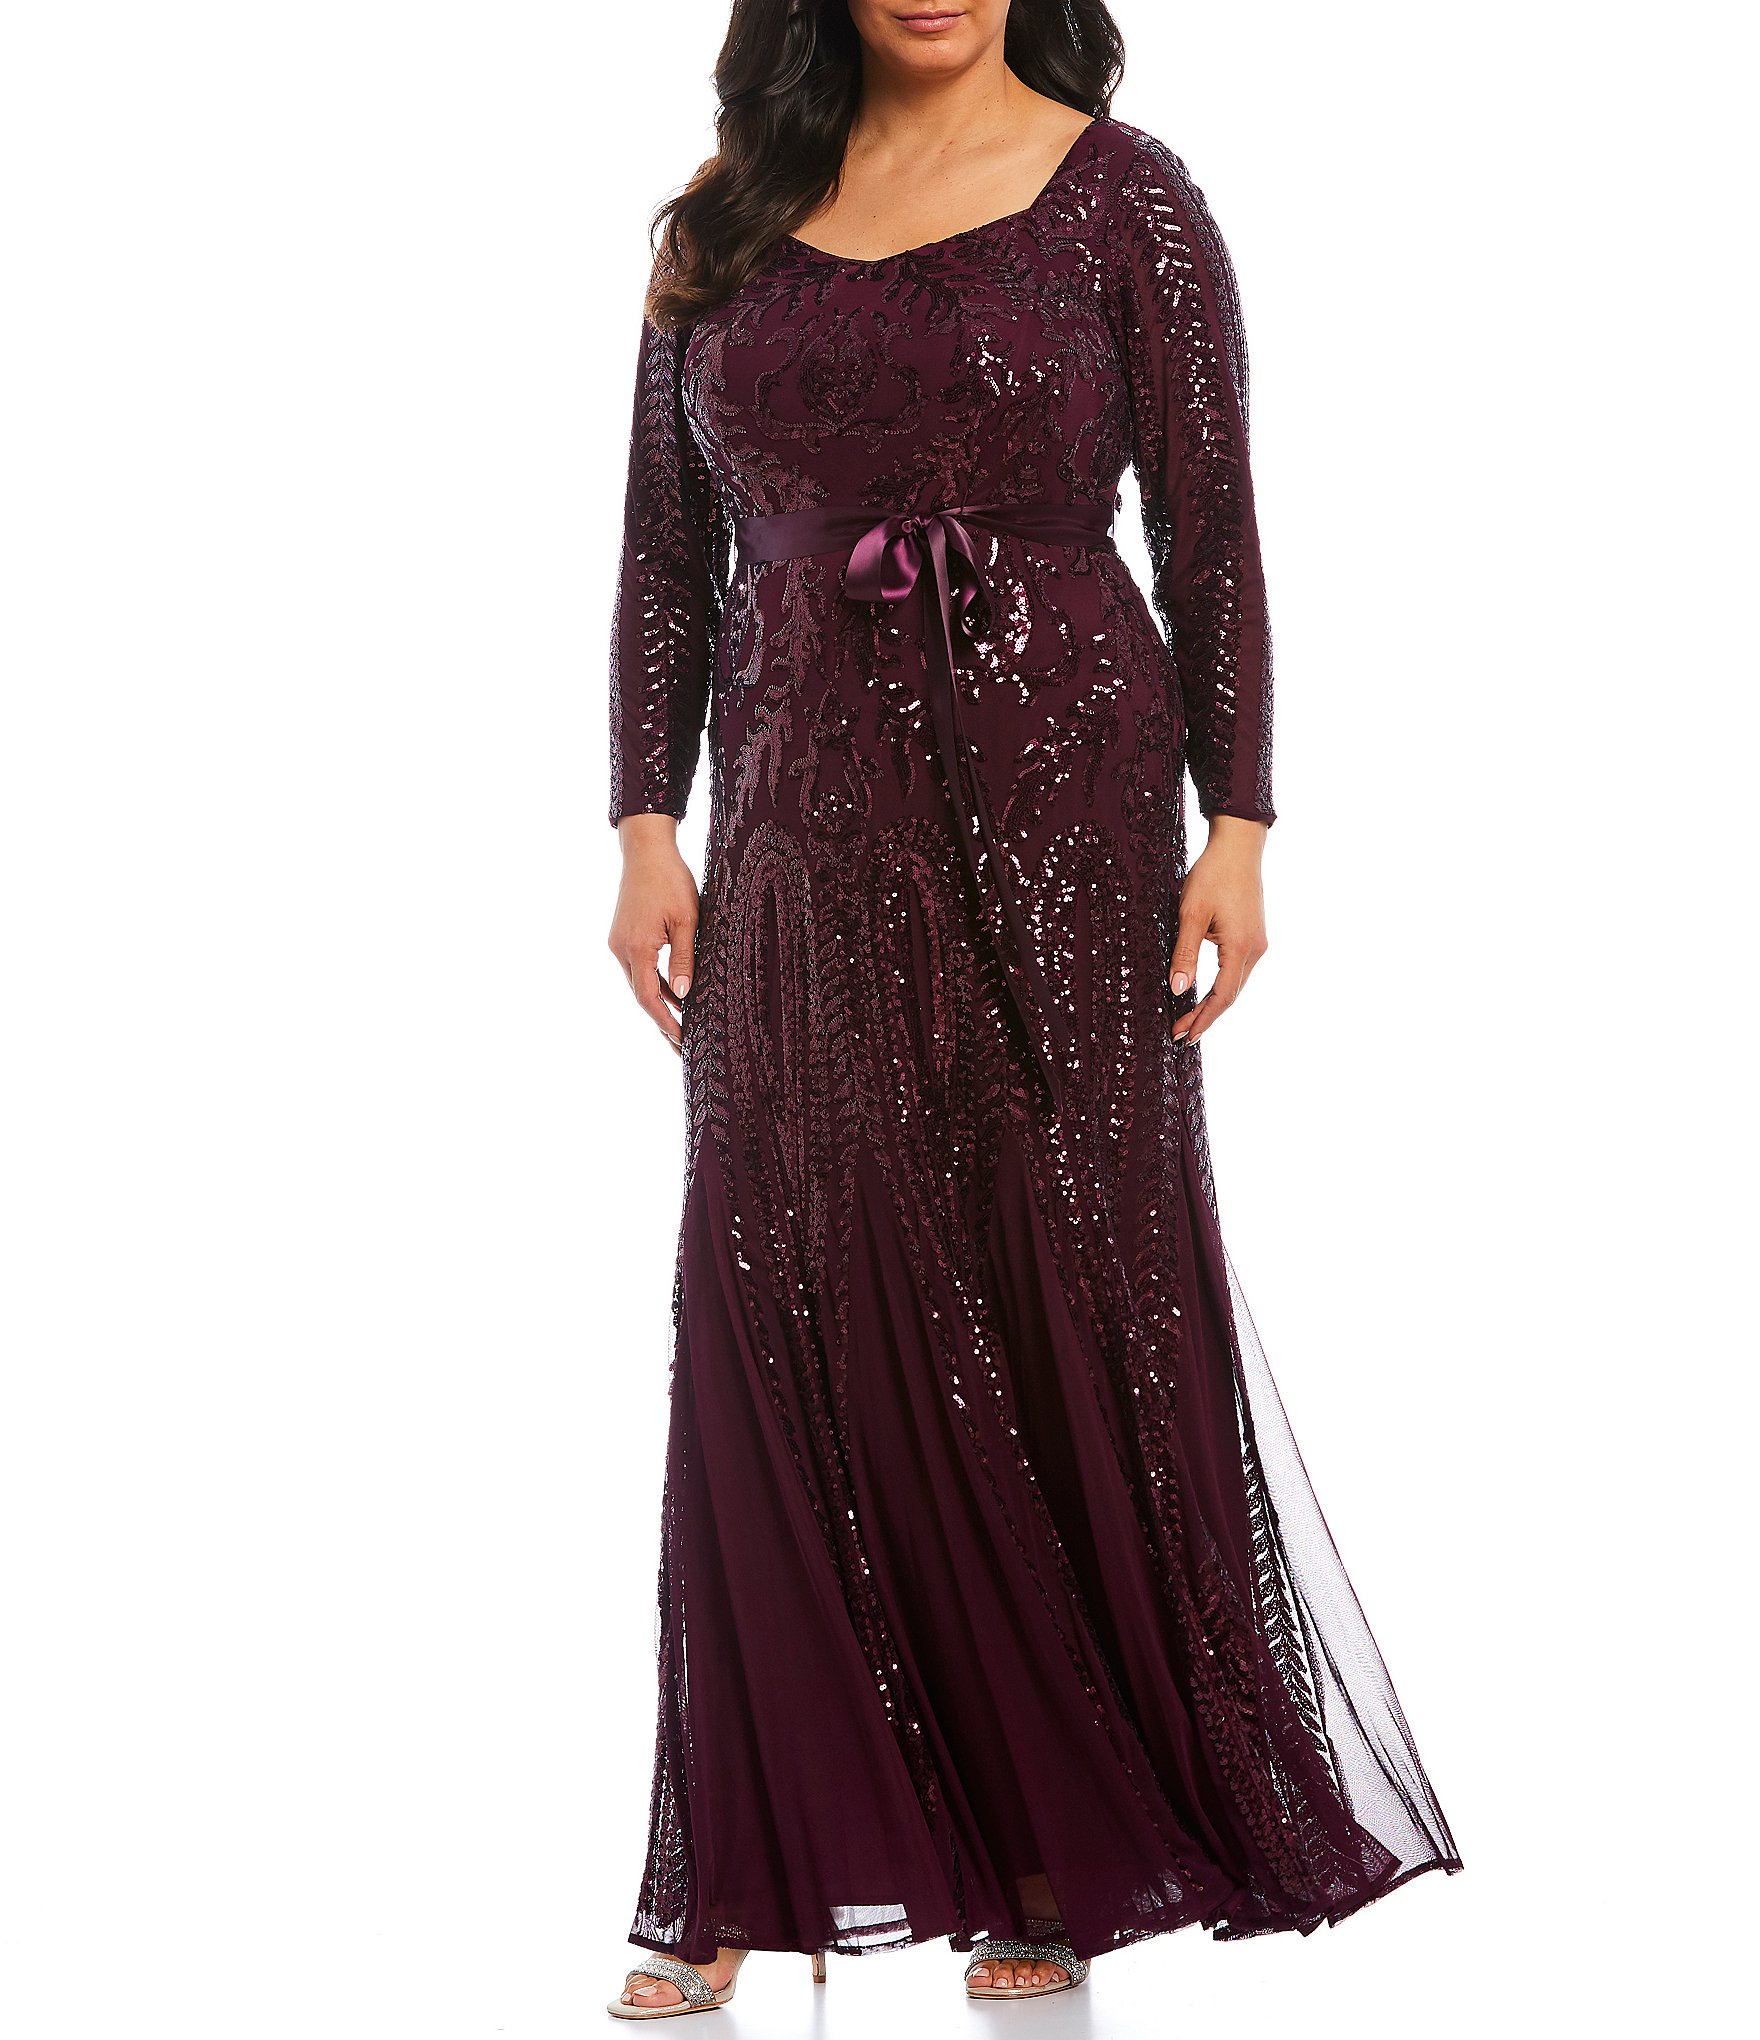 purple and gold plus size dresses